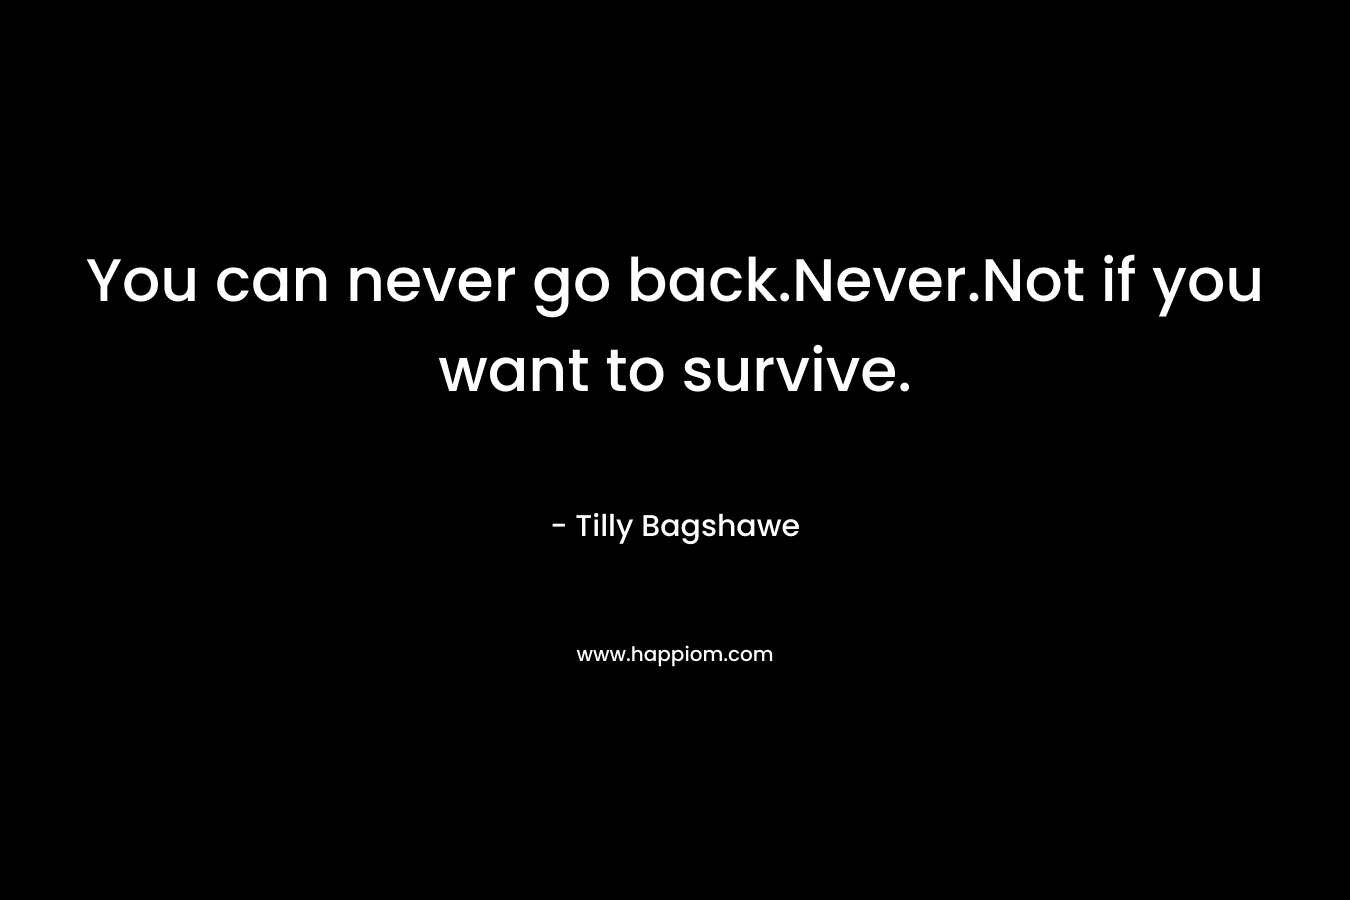 You can never go back.Never.Not if you want to survive. – Tilly Bagshawe